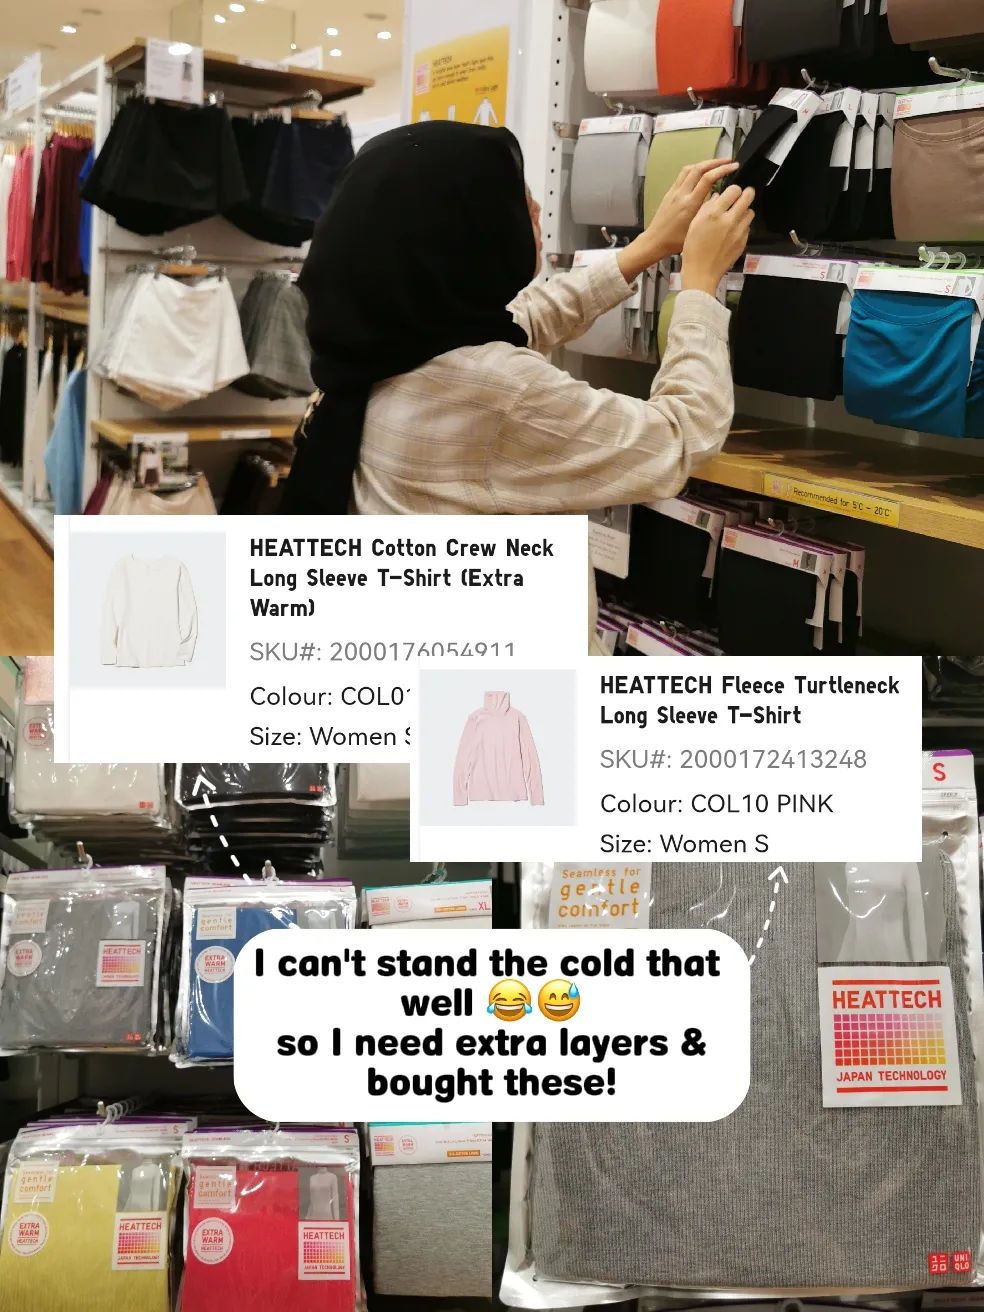 AEON MALL Japan - UNIQLO's HEATTECH is a must-have on cold and